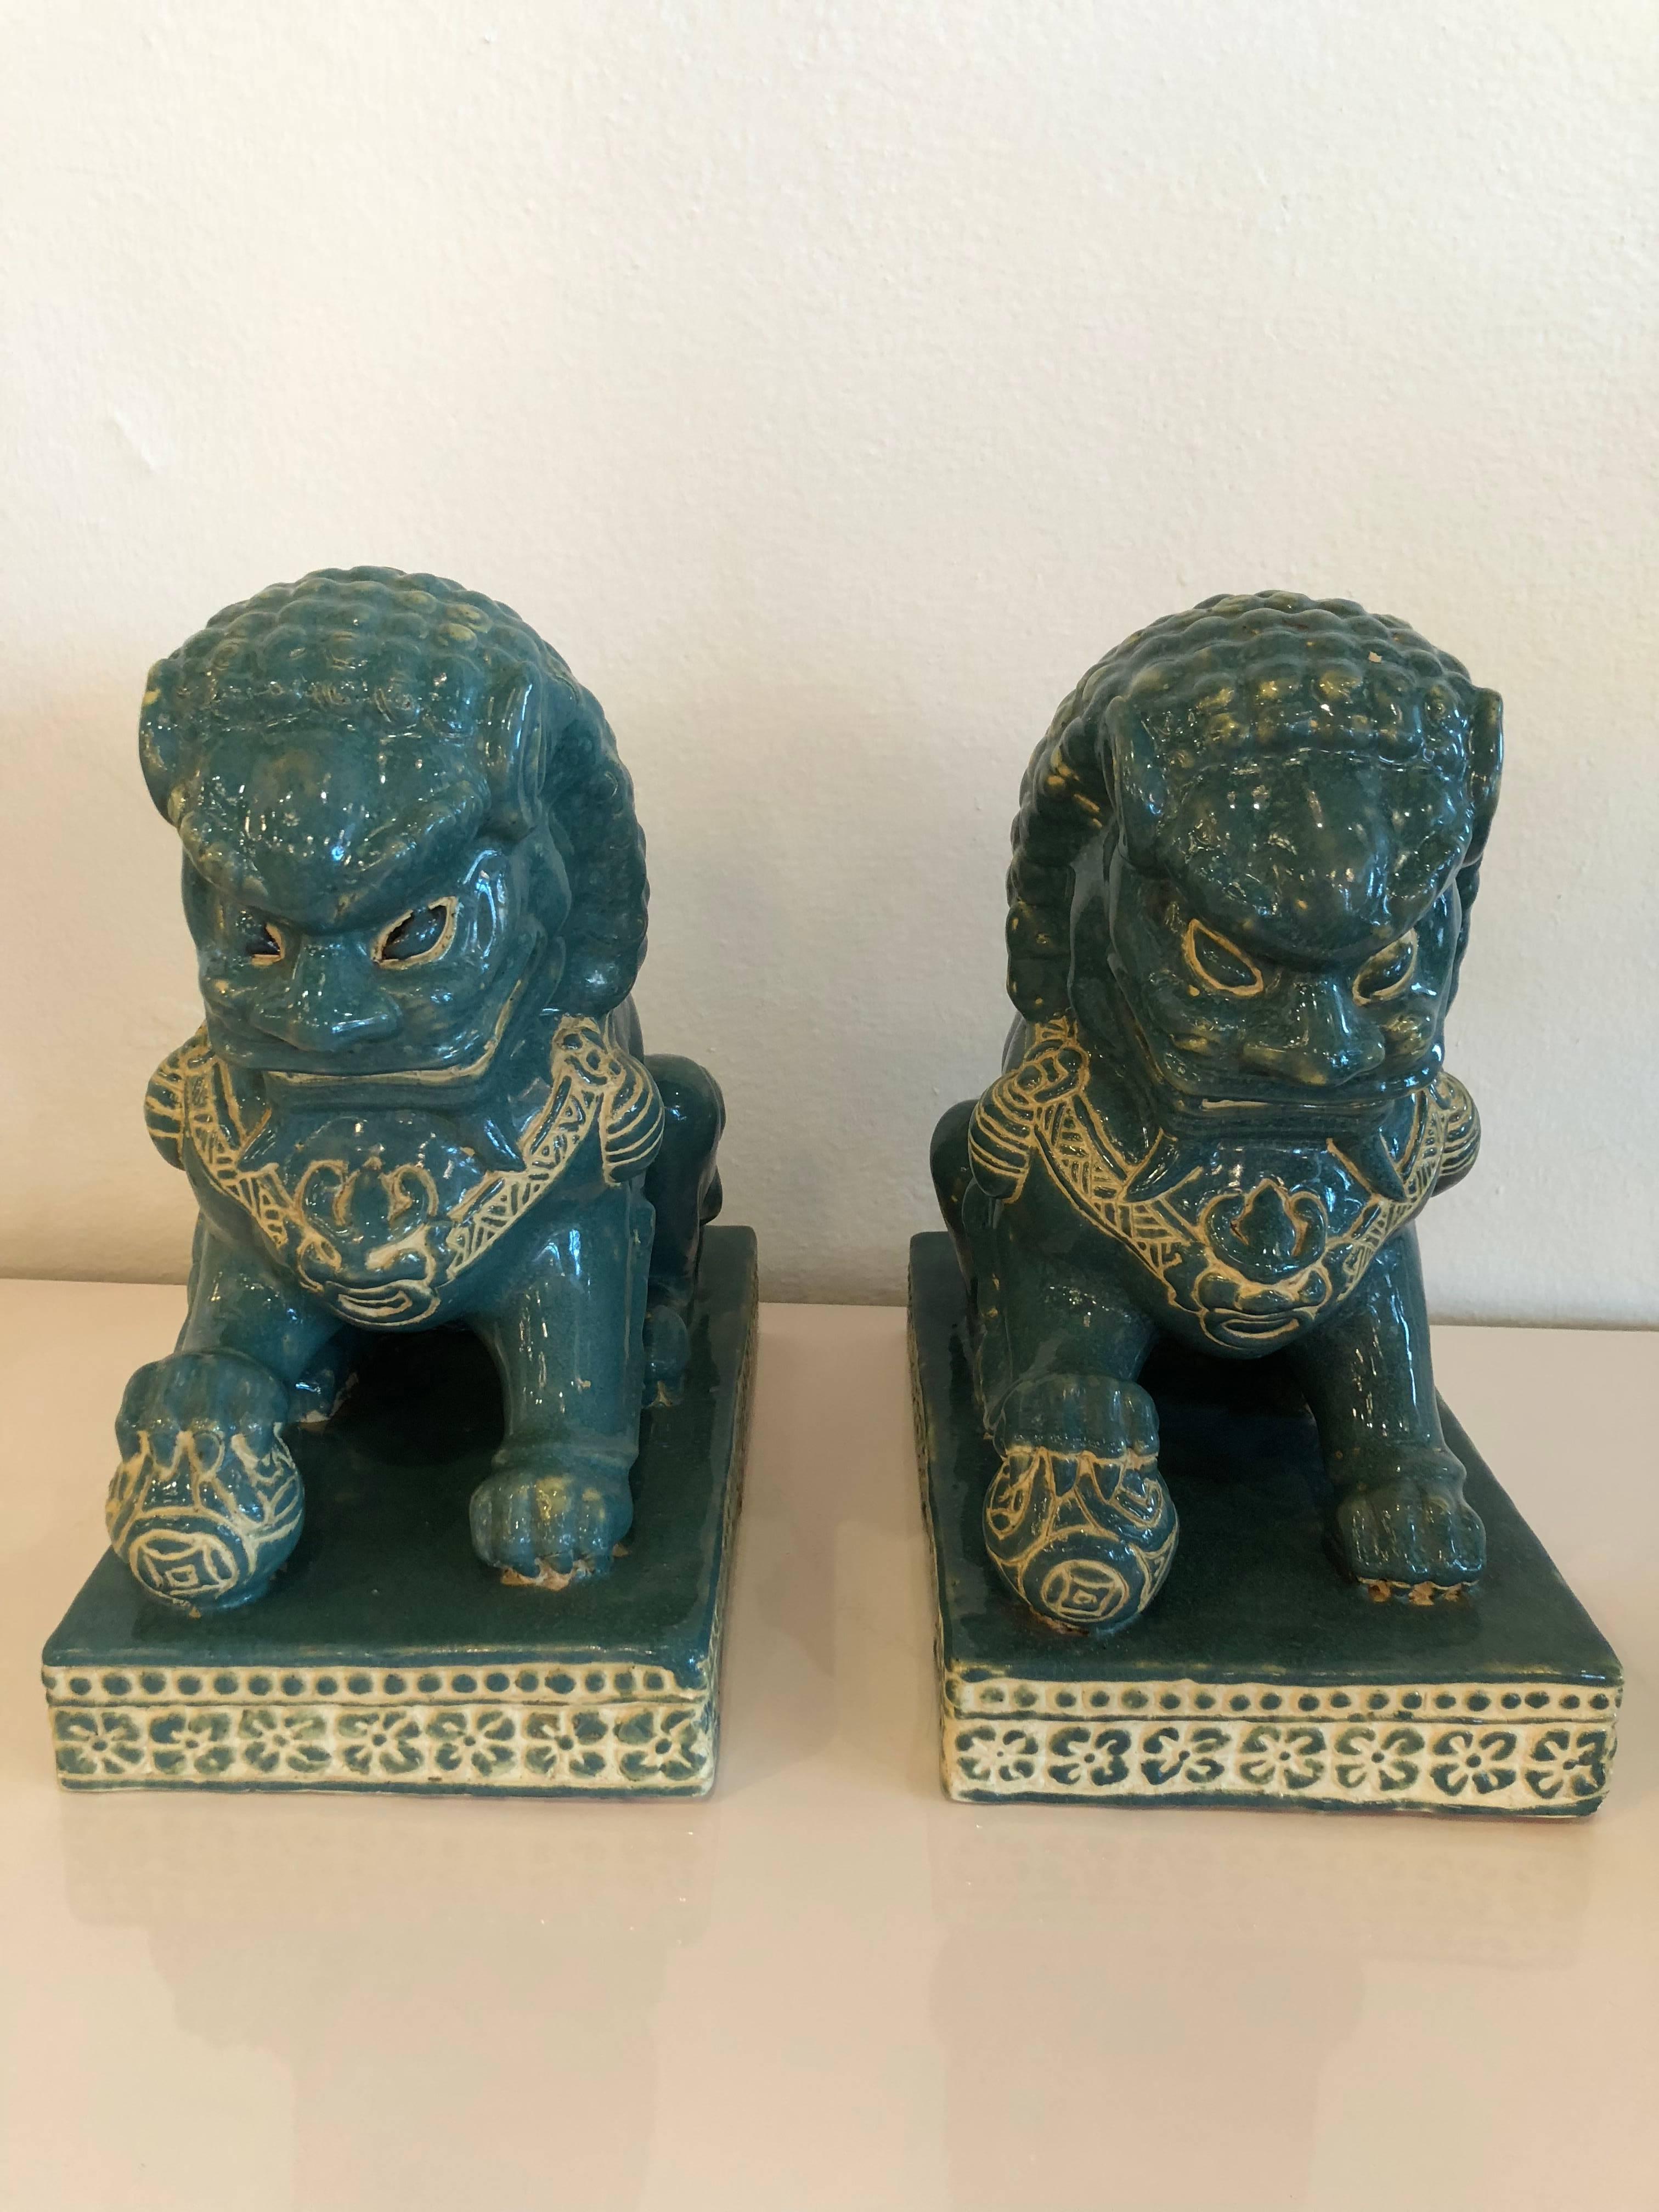 Lovely pair of  vintage teal green blue foo dogs. No chips or breaks. 